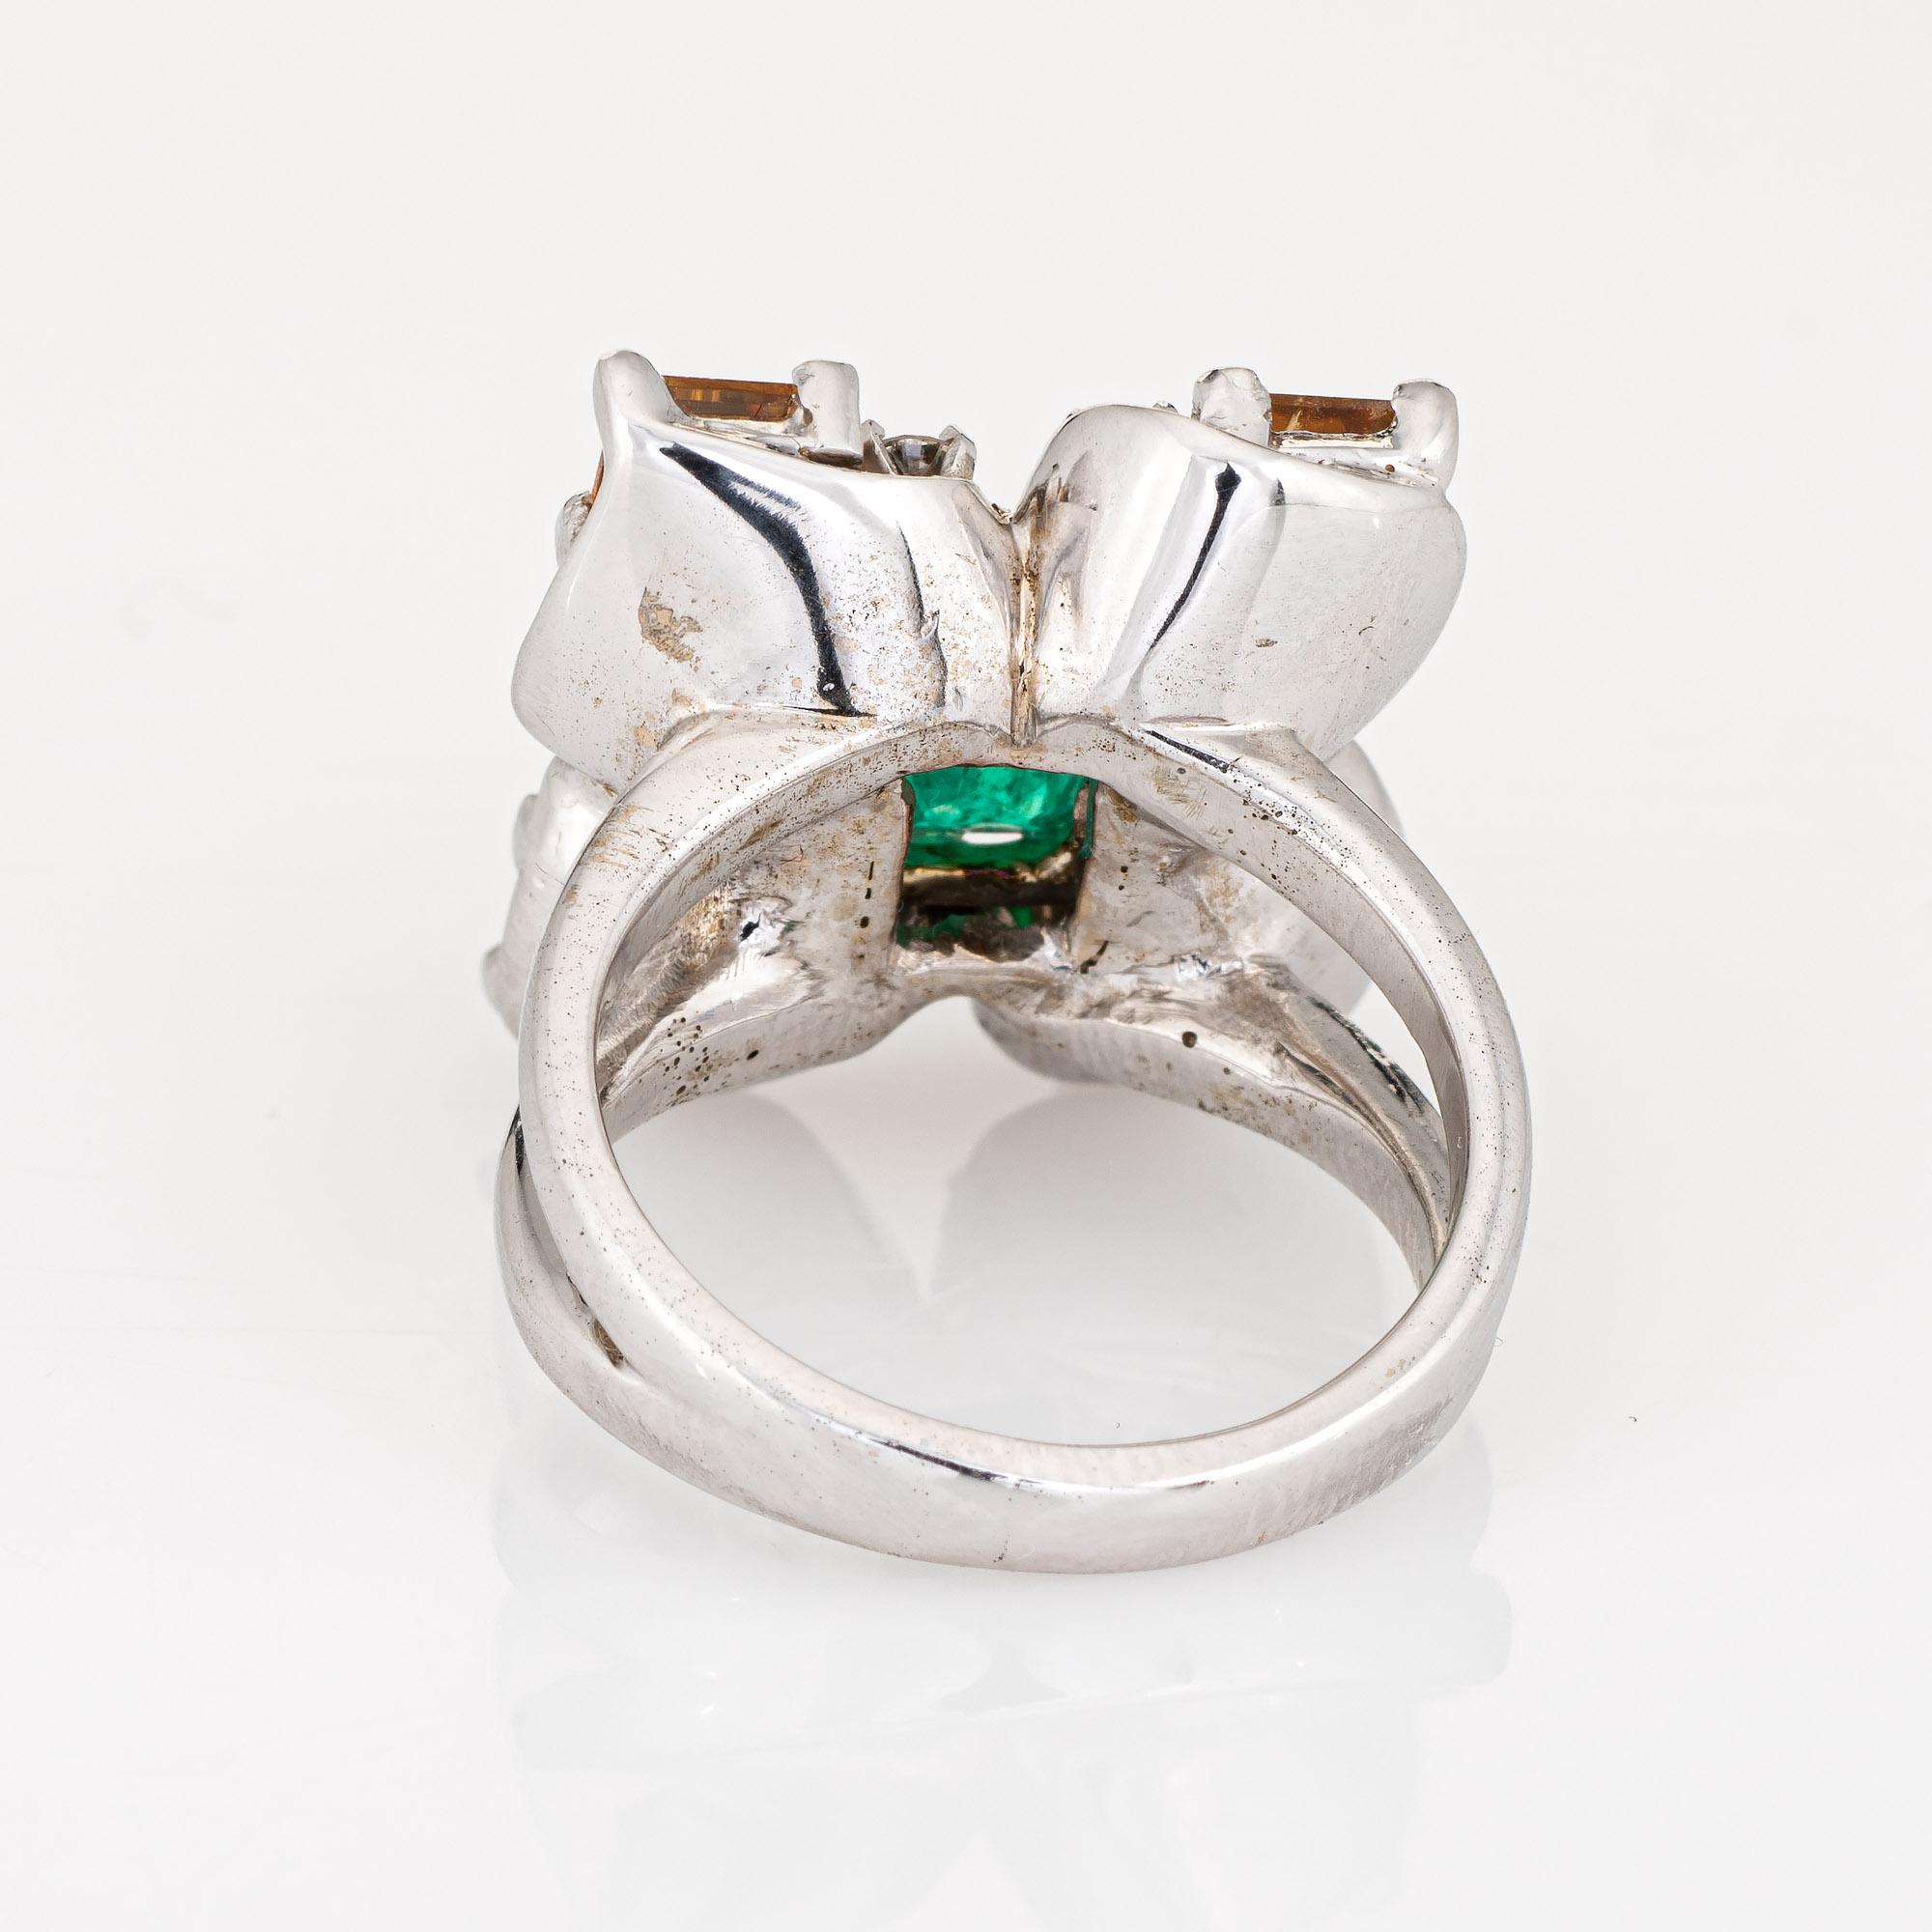 Emerald Citrine Diamond Ring Square Cocktail 14k White Gold Sz 5.5 Fine Jewelry In Good Condition For Sale In Torrance, CA